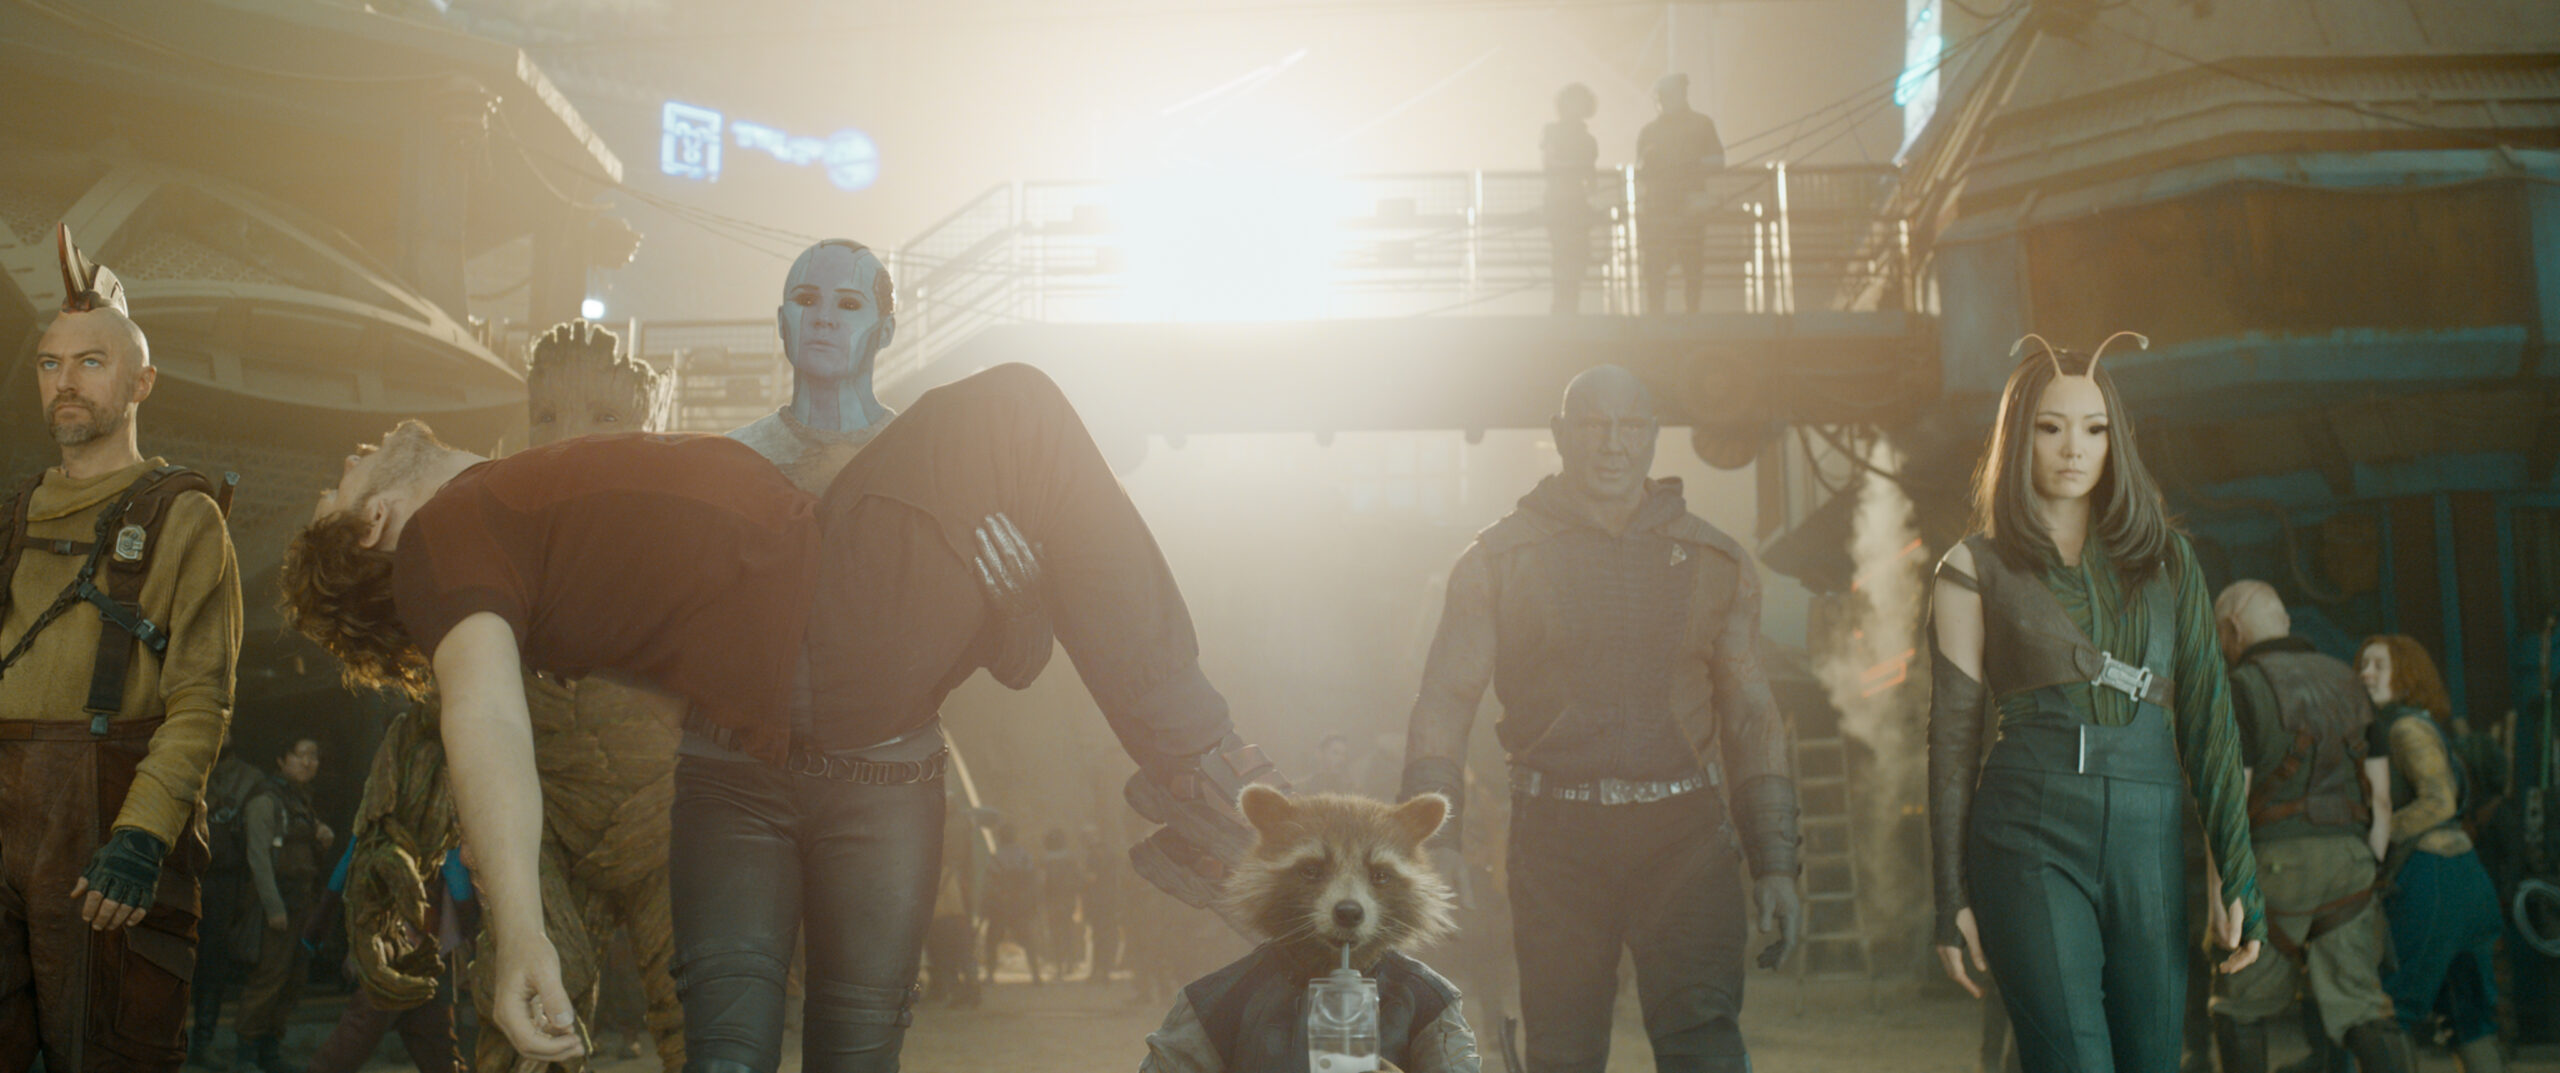 Over the weekend we got a little information including the Guardians 3 runtime, one character redesign and James Gunn on F Bombs.